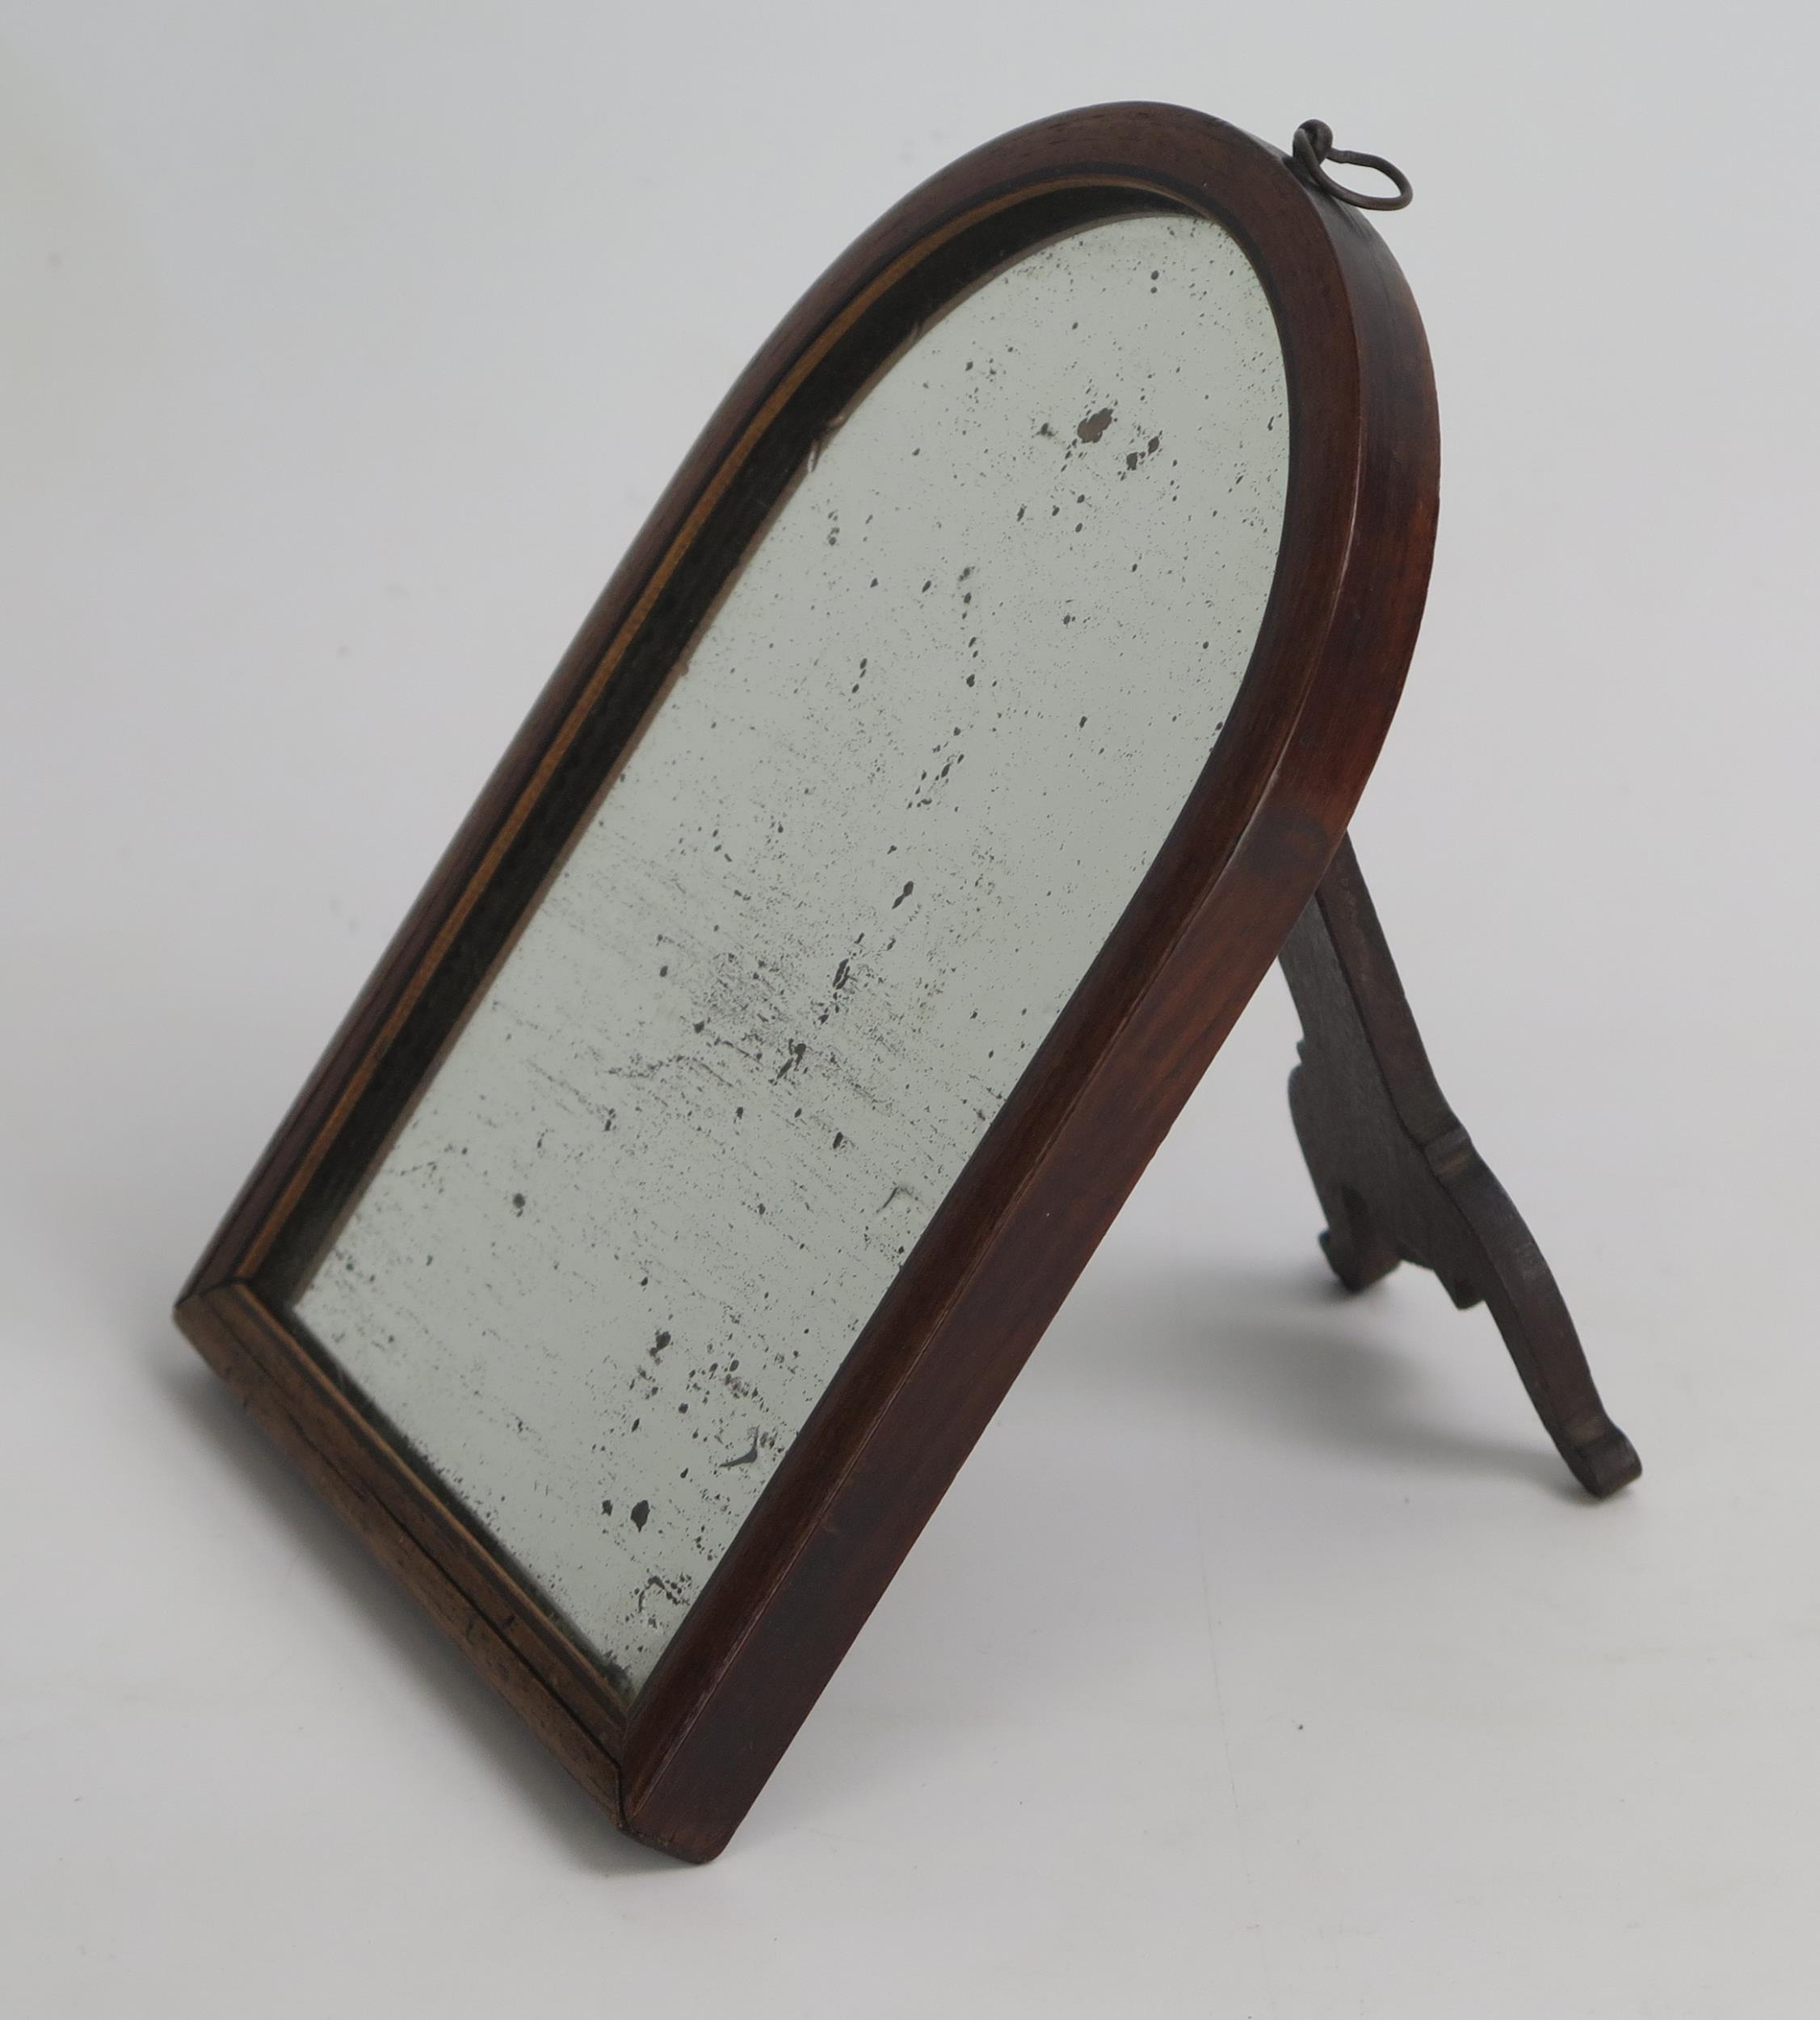 A Small 19th Century Mahogany Arch Top Strut Mirror with suspension loop, 17.5x12.5cm - Image 2 of 3